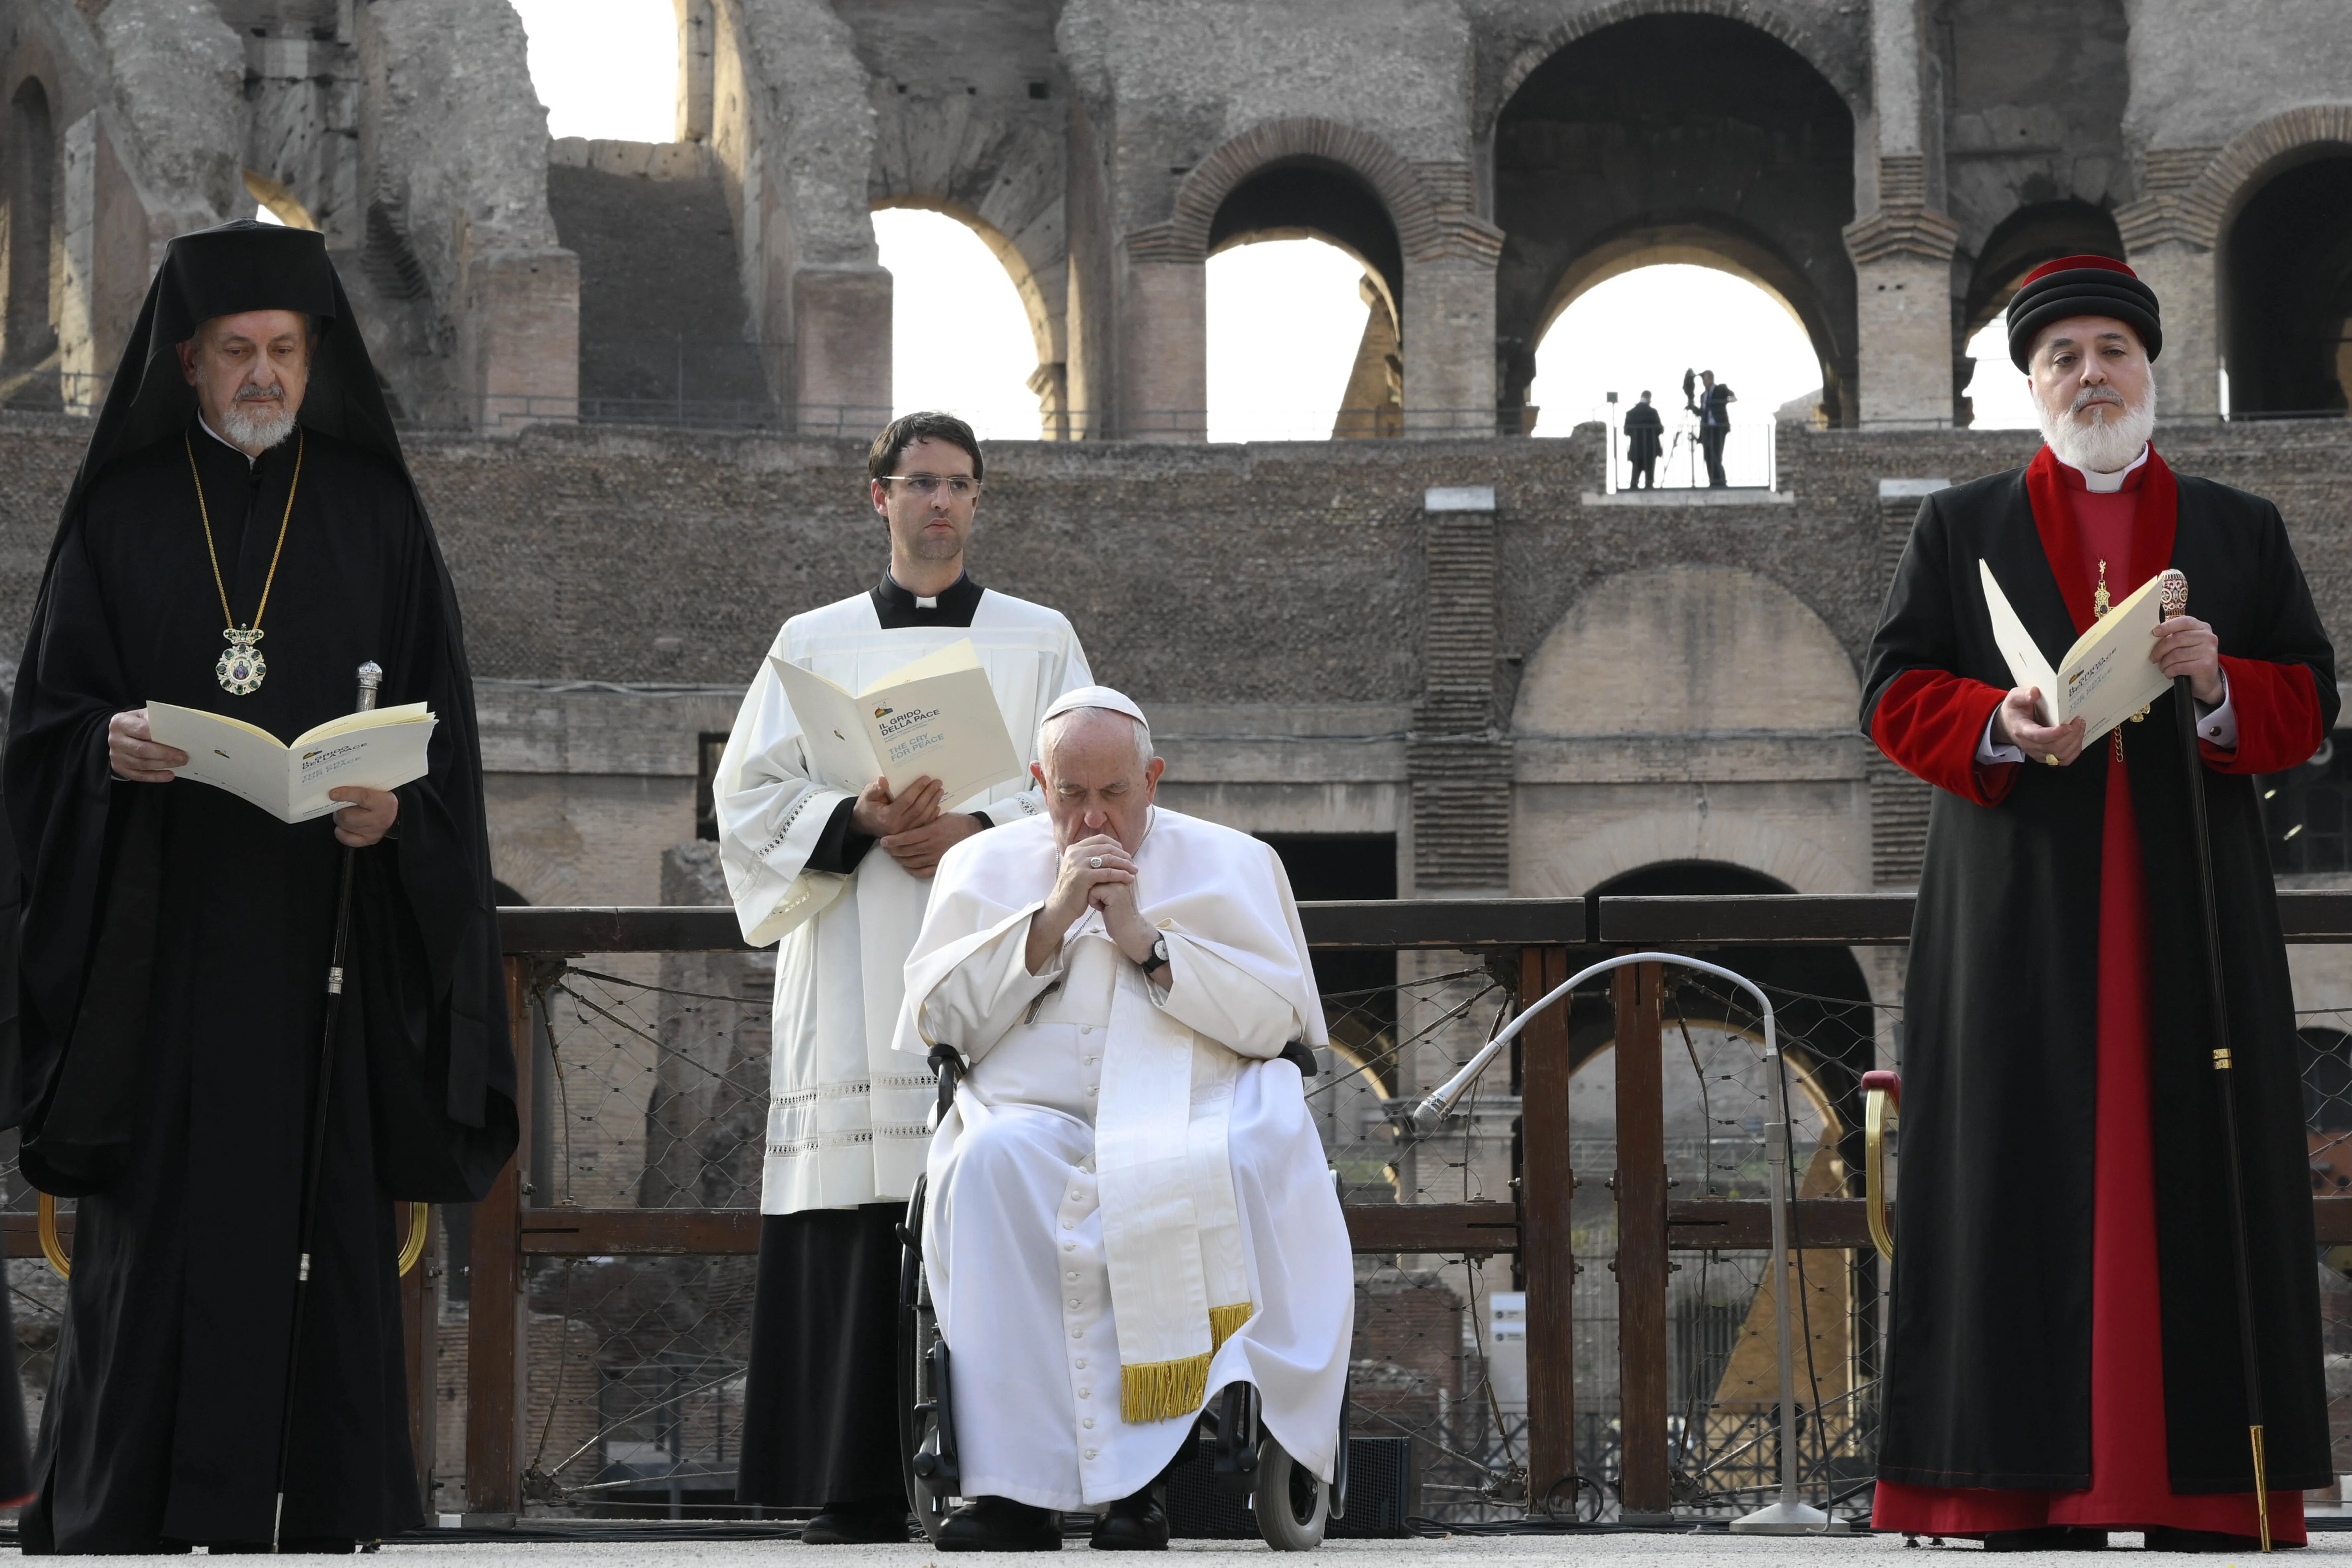 Pope Francis prays during an interreligious peace appeal at the Colosseum in Rome, Oct. 25, 2022.?w=200&h=150